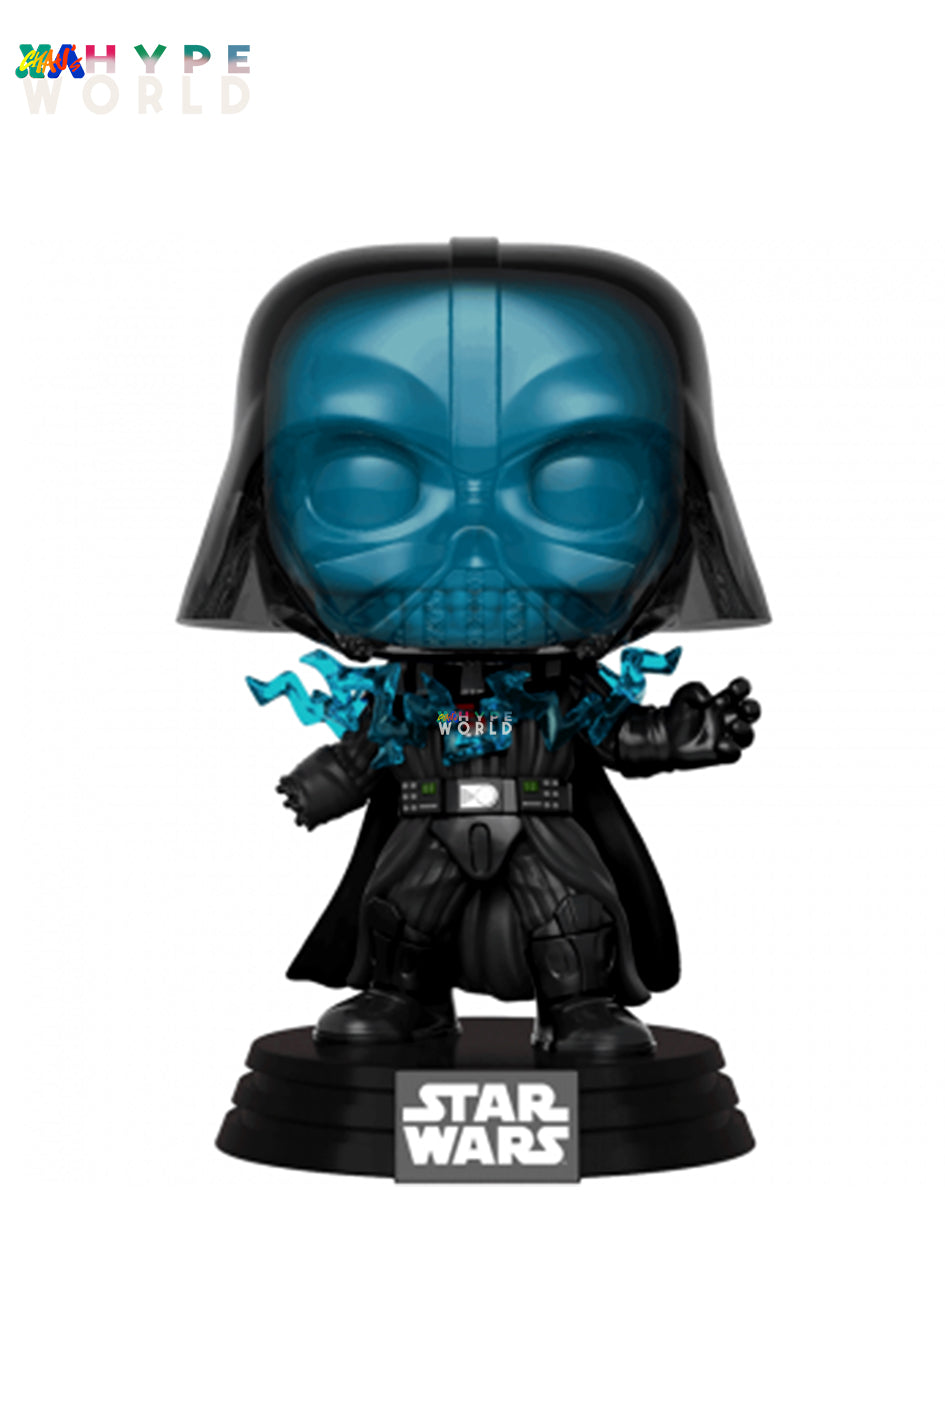 Star Wars - Darth Vader Electrocuted 288 [Foldable Protector]